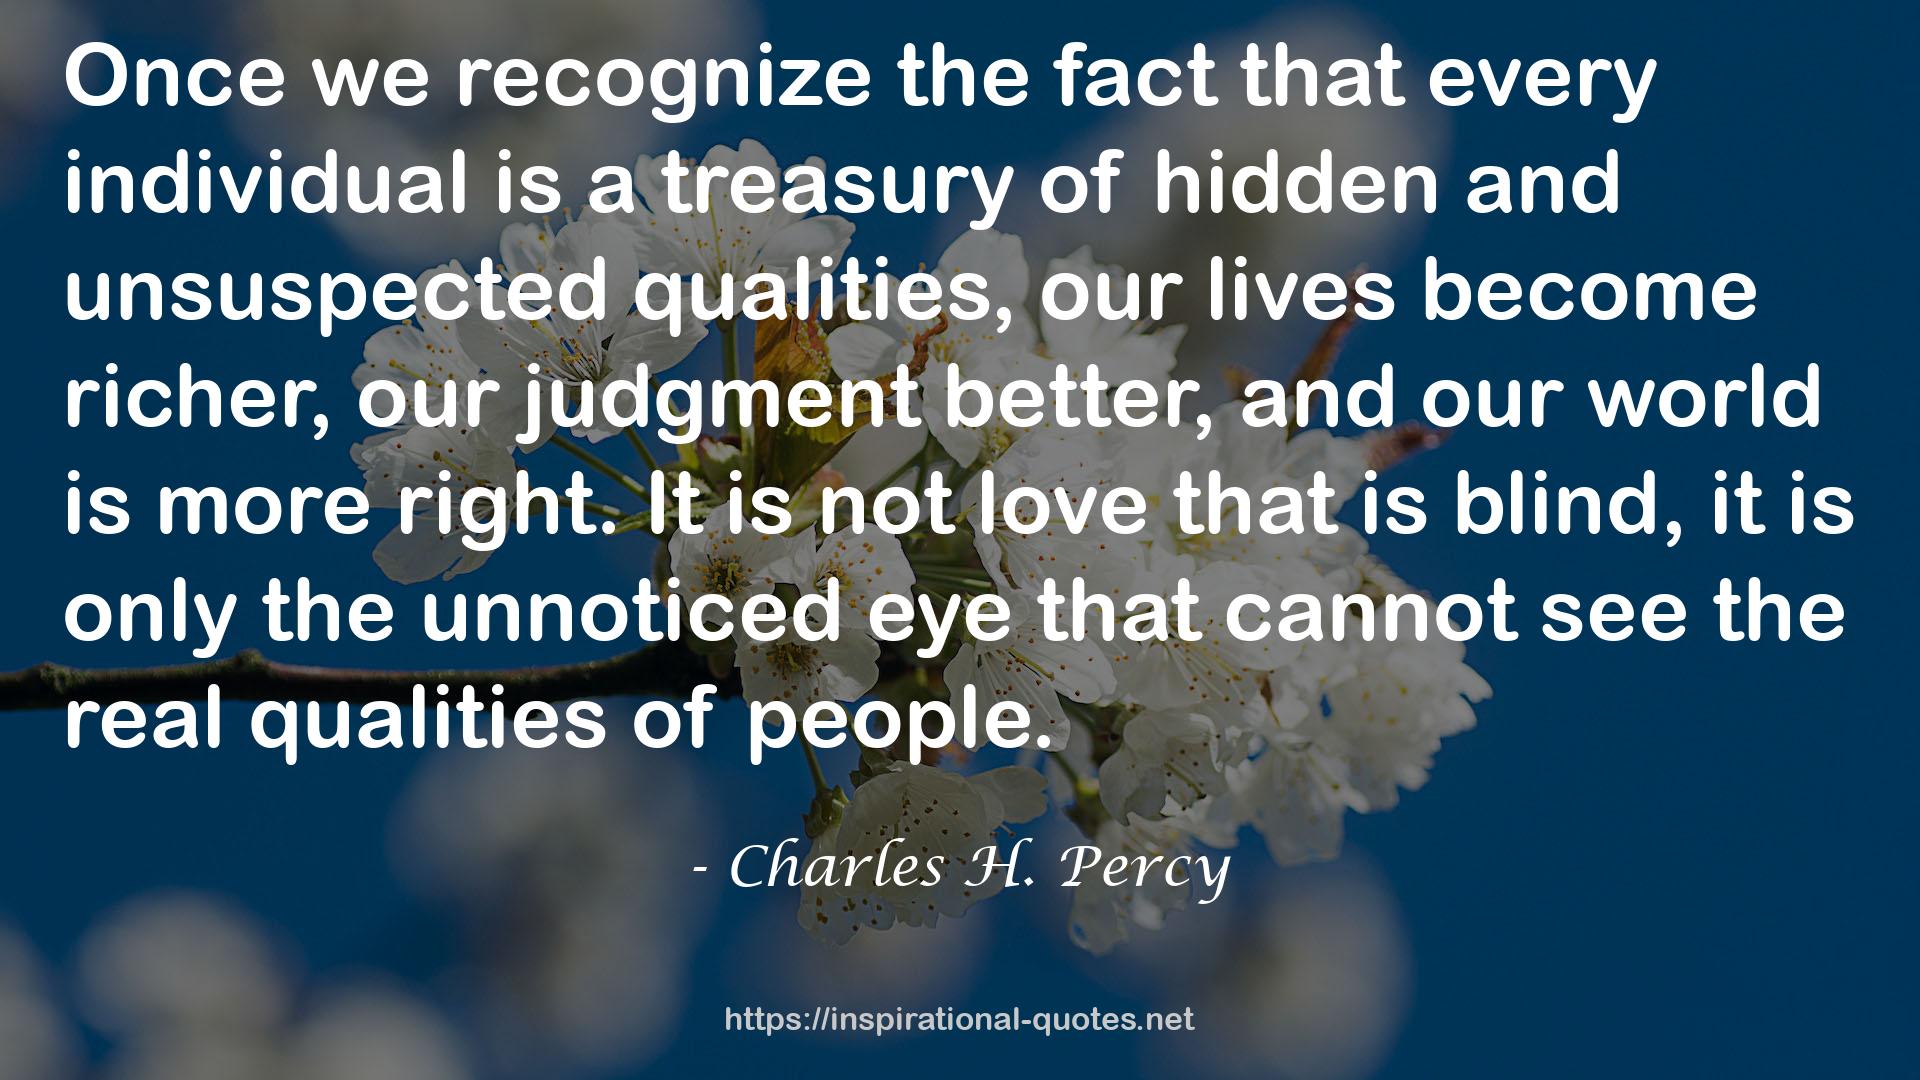 Charles H. Percy QUOTES